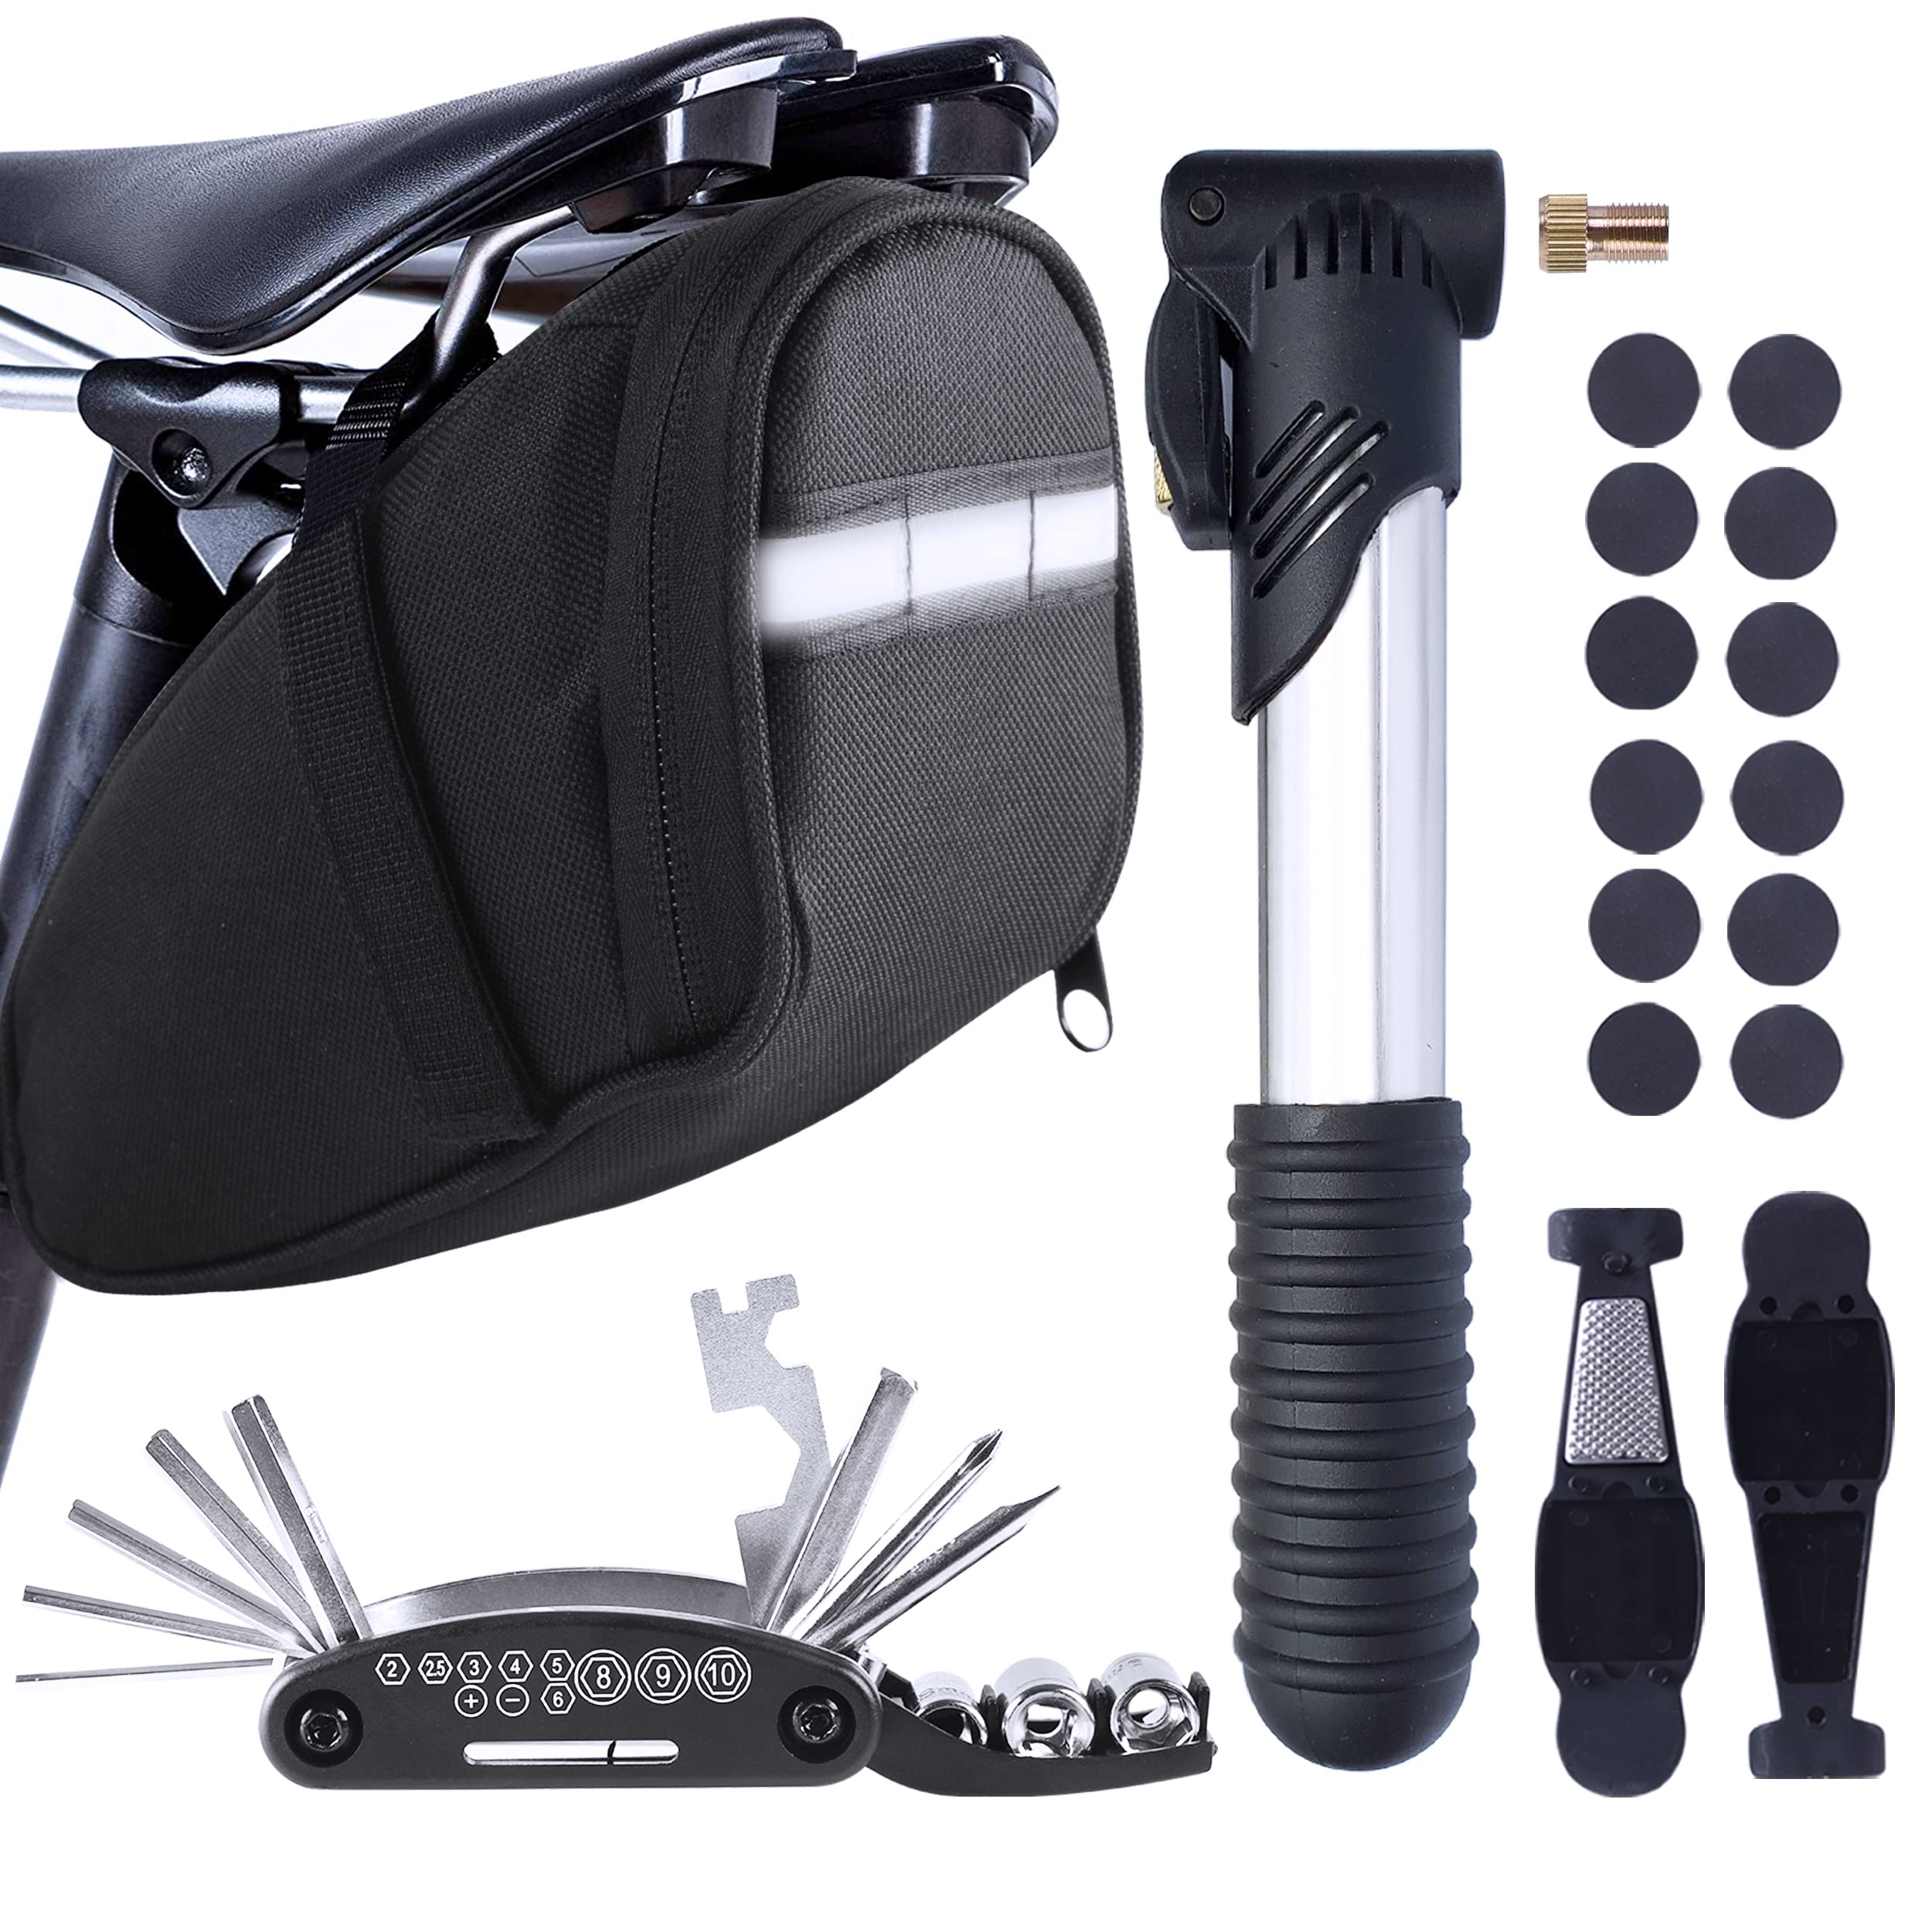 Bicycle Accessory Kit Clearance - partnerservizi.it 1694199089